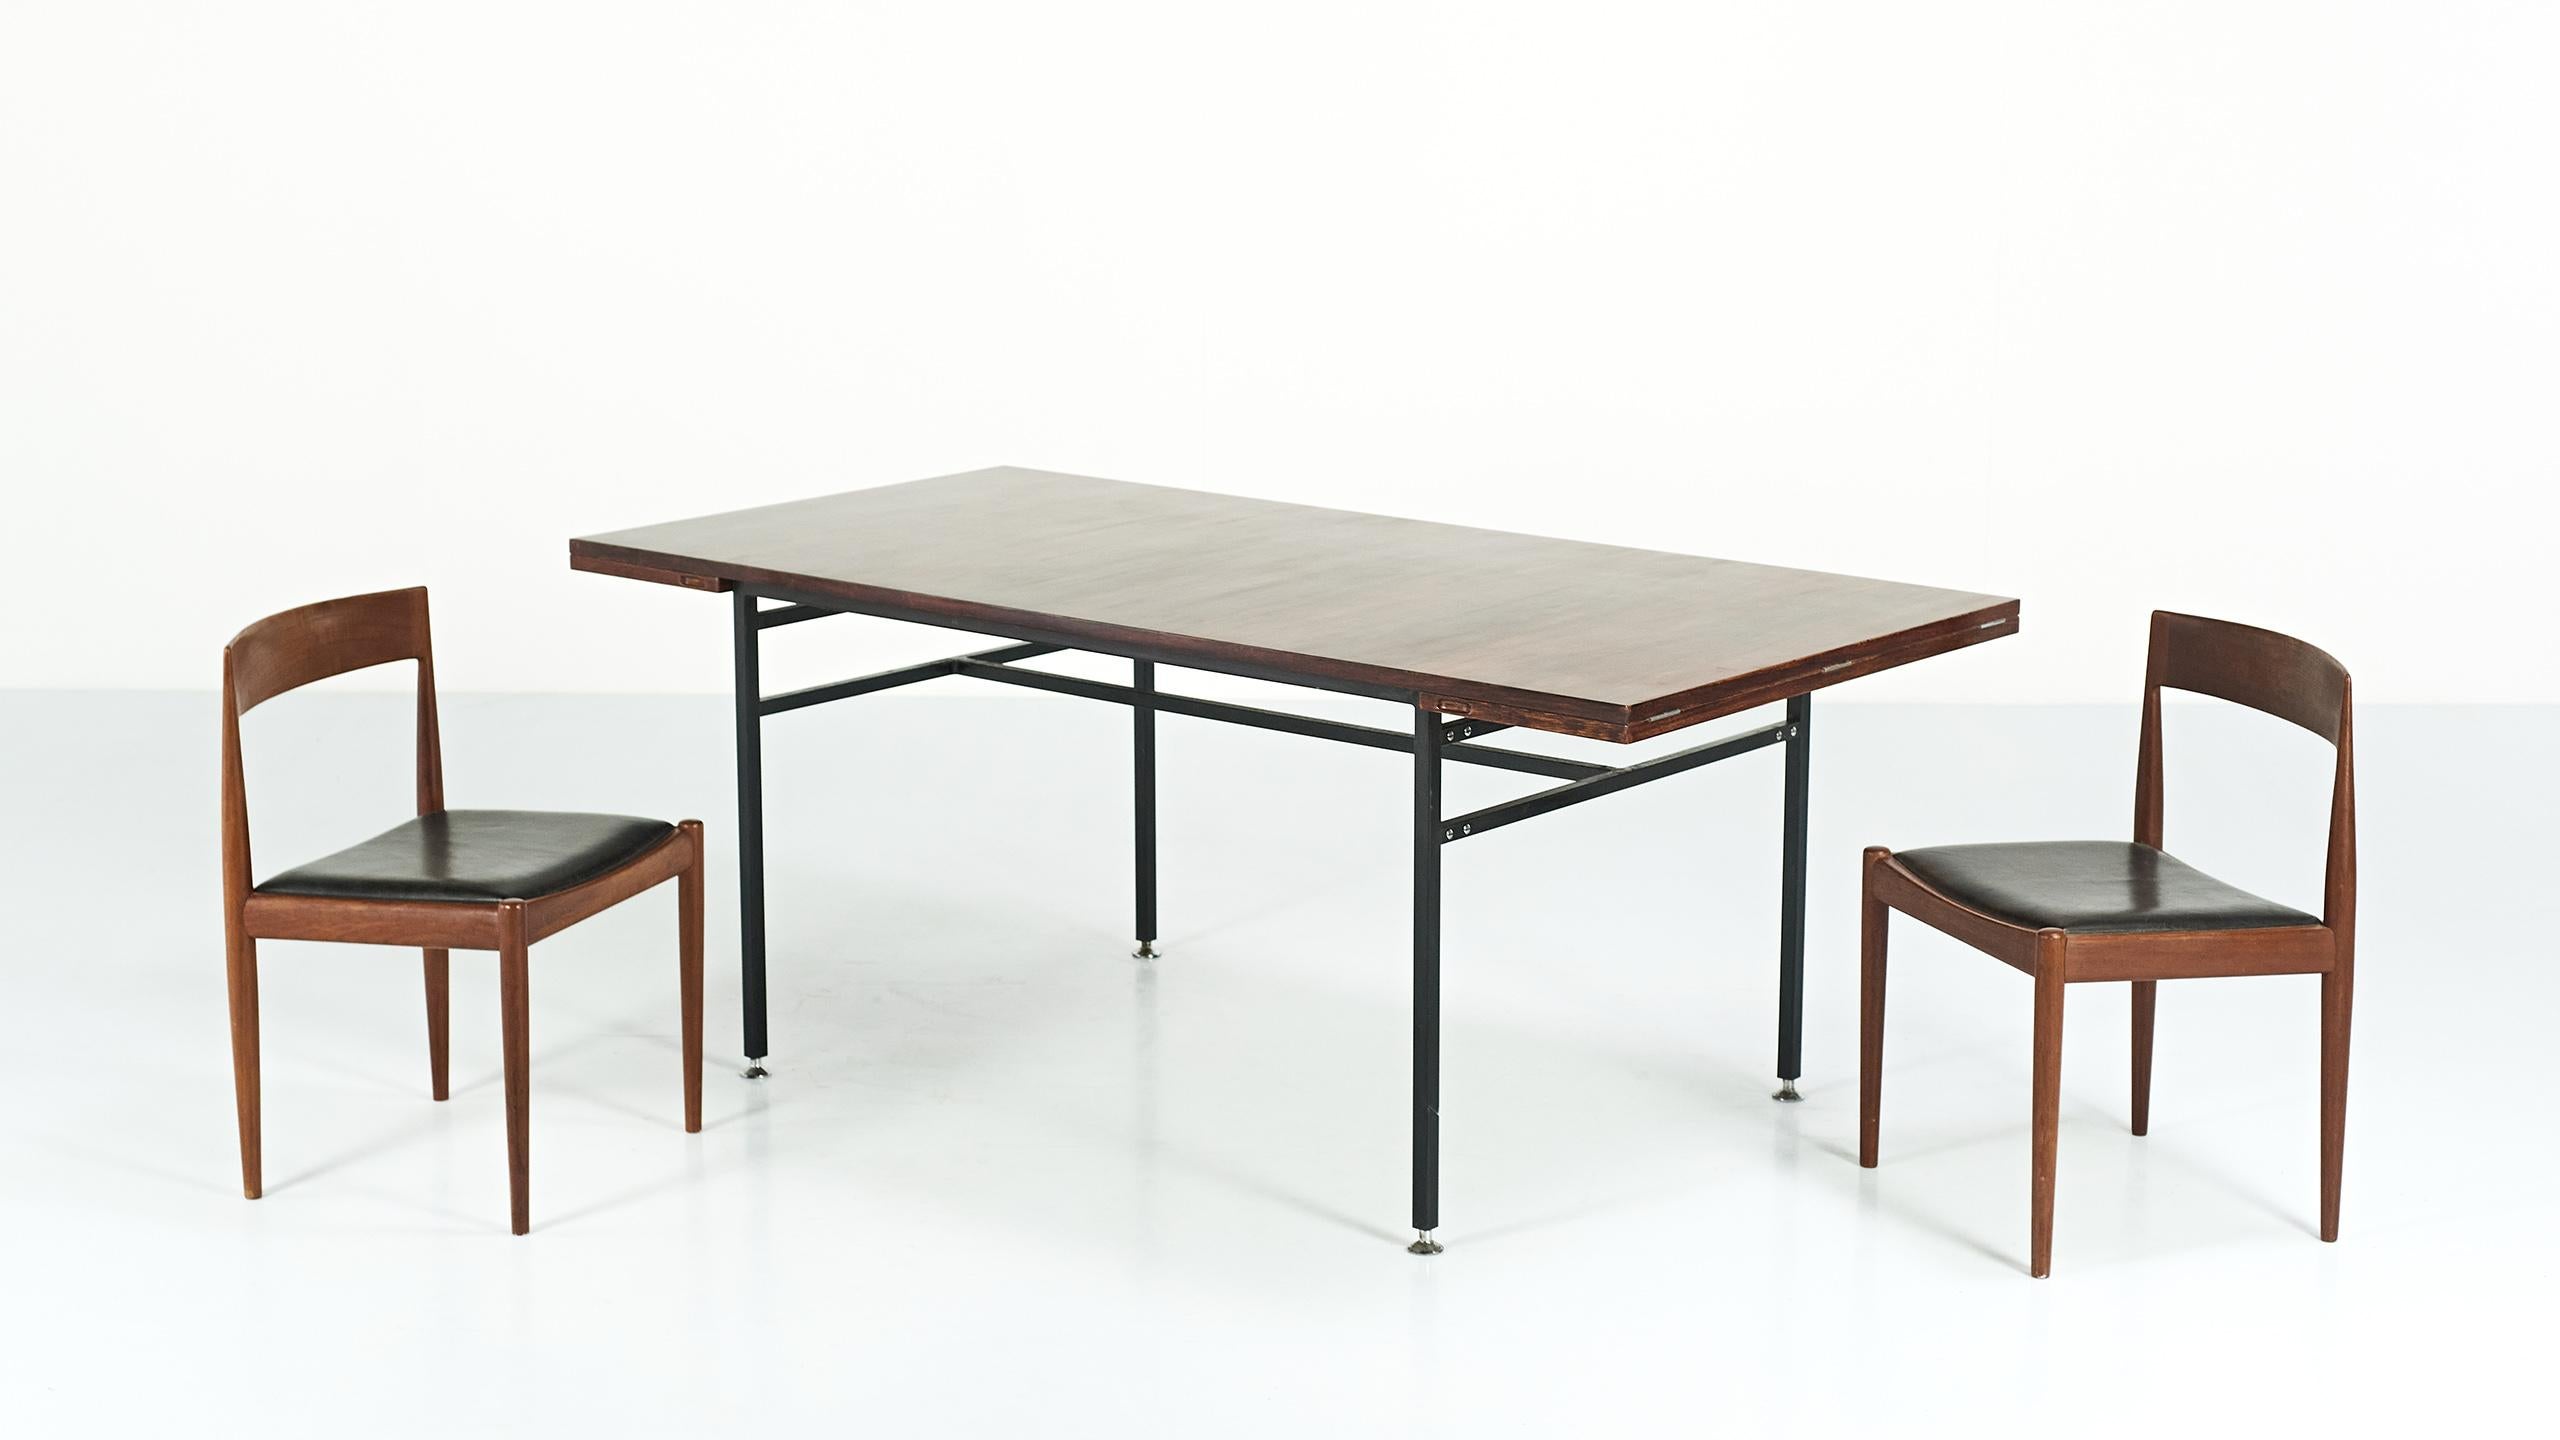 Modernist dining table, by French designer Alain Richard and manufactured by Meubles TV during the 50’s. It consist on a walnut veneered table top, with two extensions, supported by a black lacquered square shaped tubular steel base, enhanced by